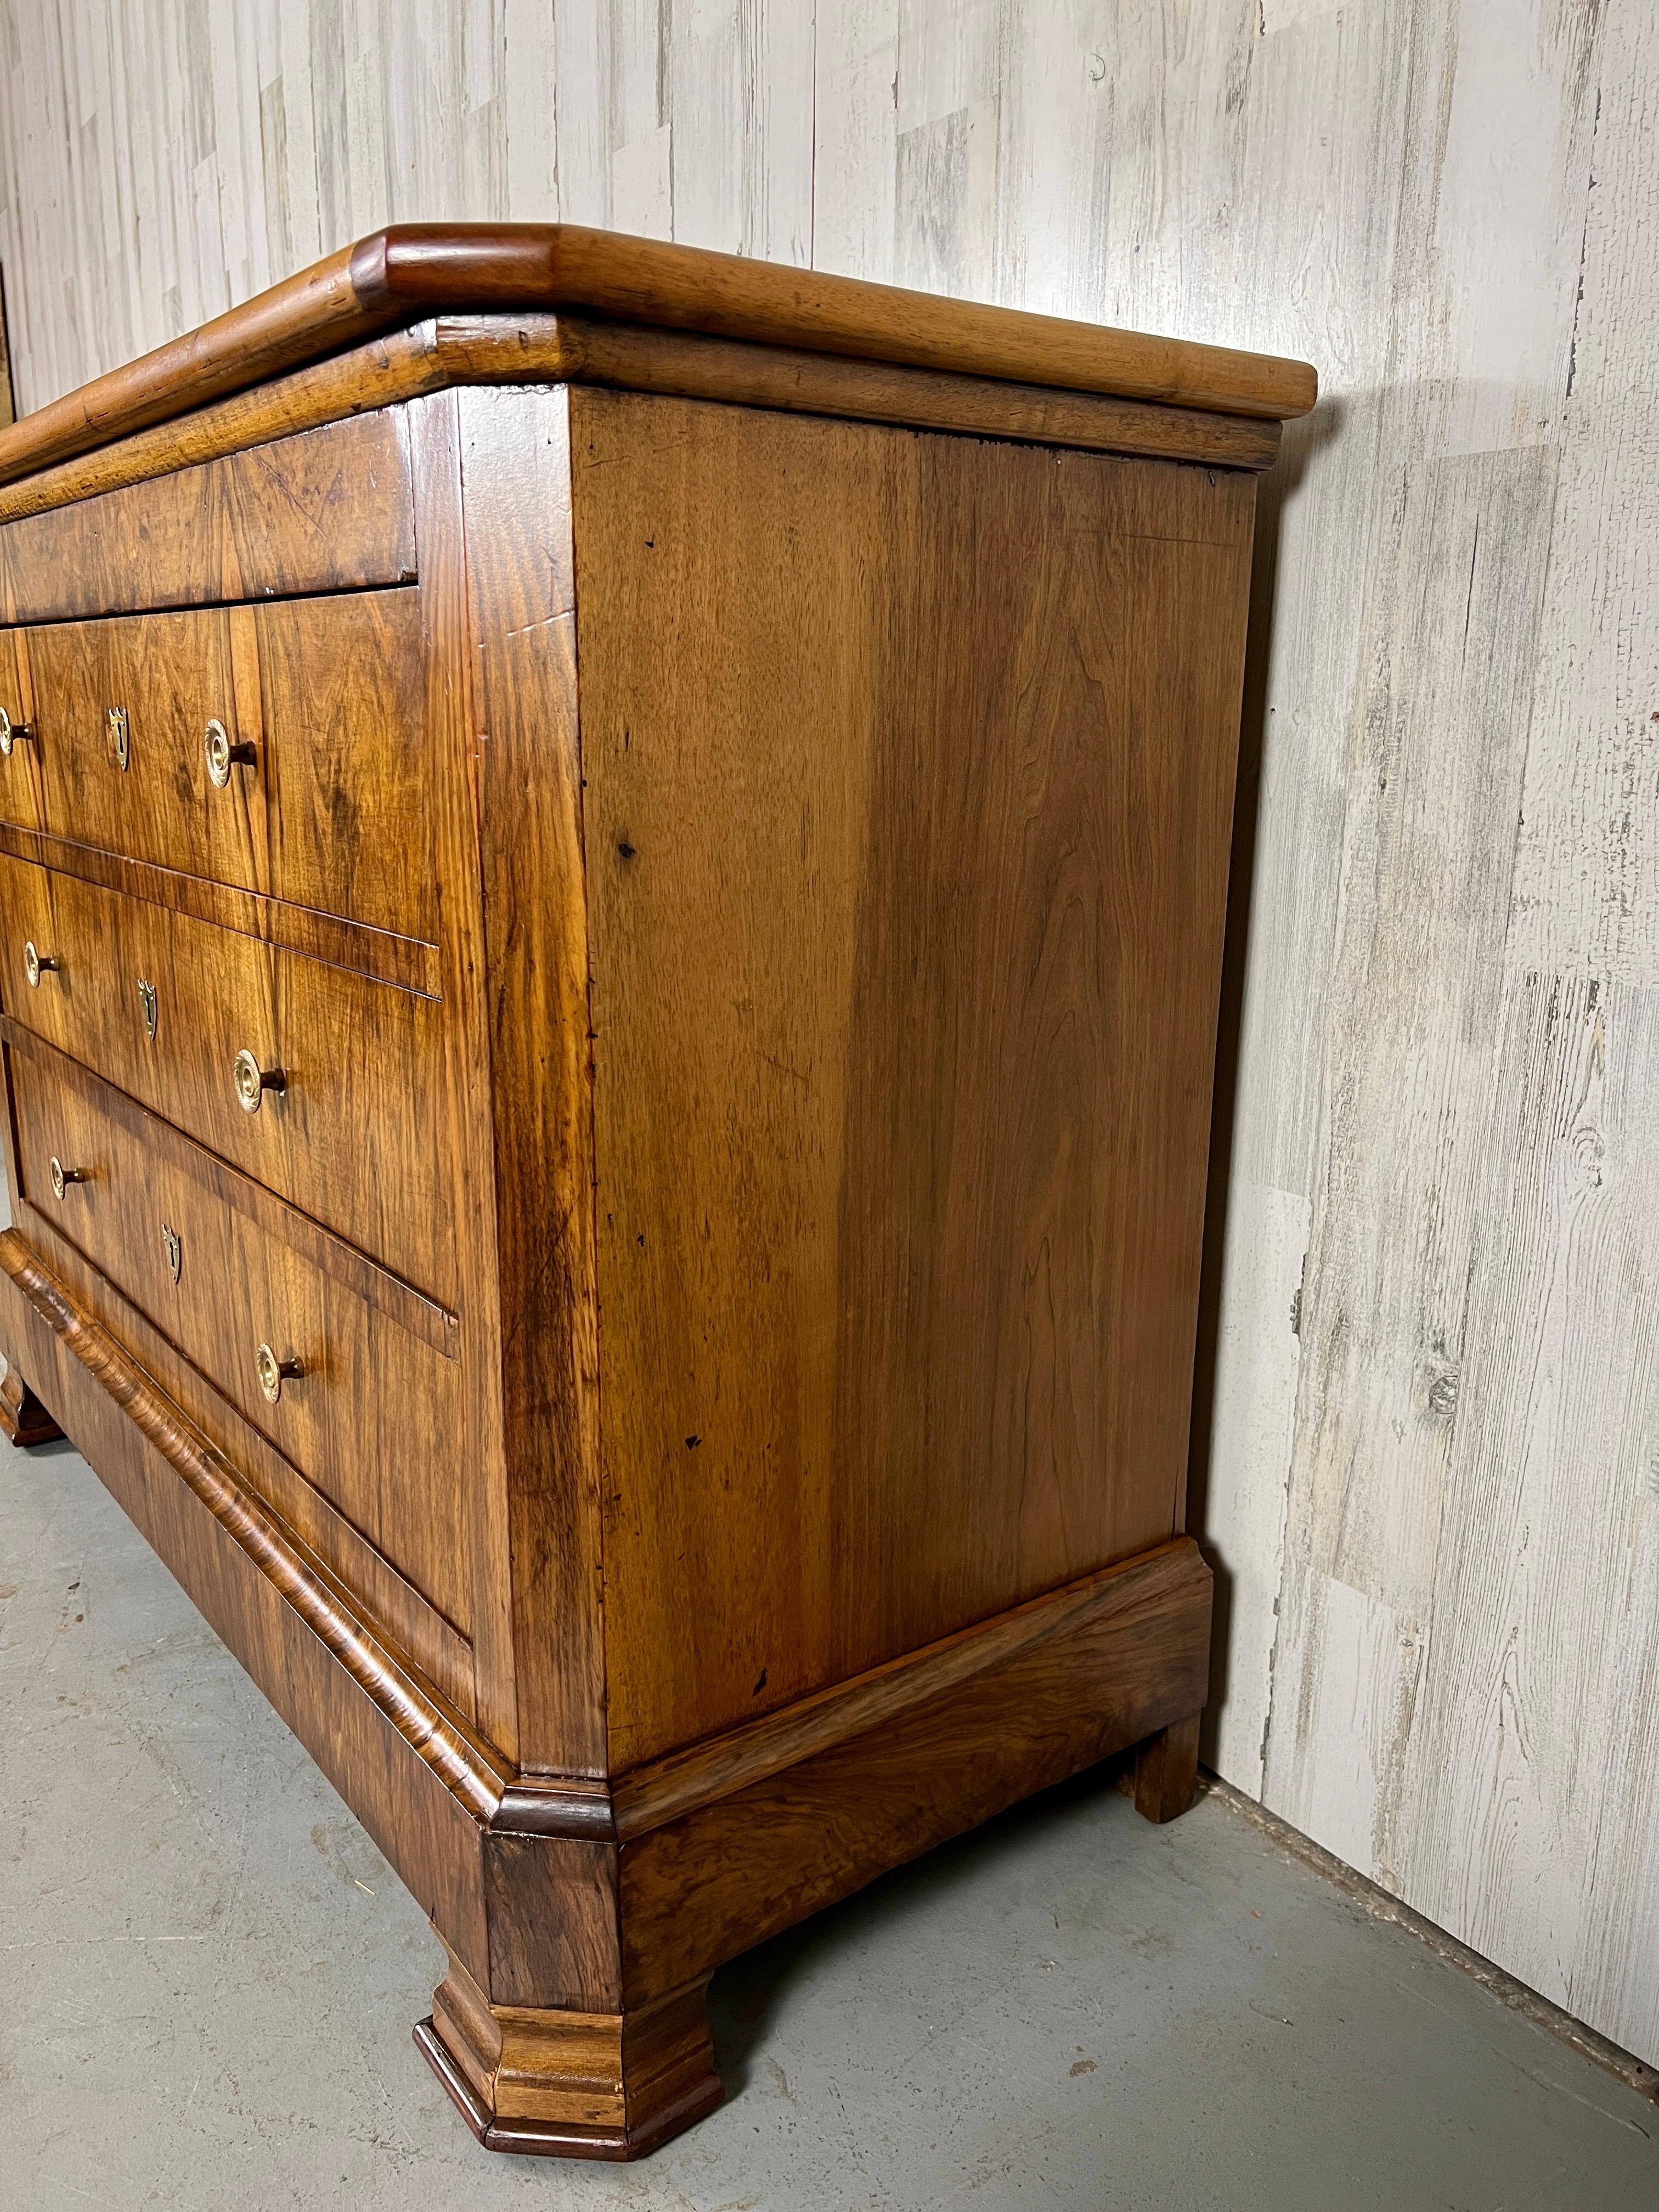 A Combination of Burled Walnut with wild cherry make this chest of drawers a stunning addition to any room. The brass pulls have a engine turned design that really adds to the overall appeal. The drawers were recently upholstered on the inside.